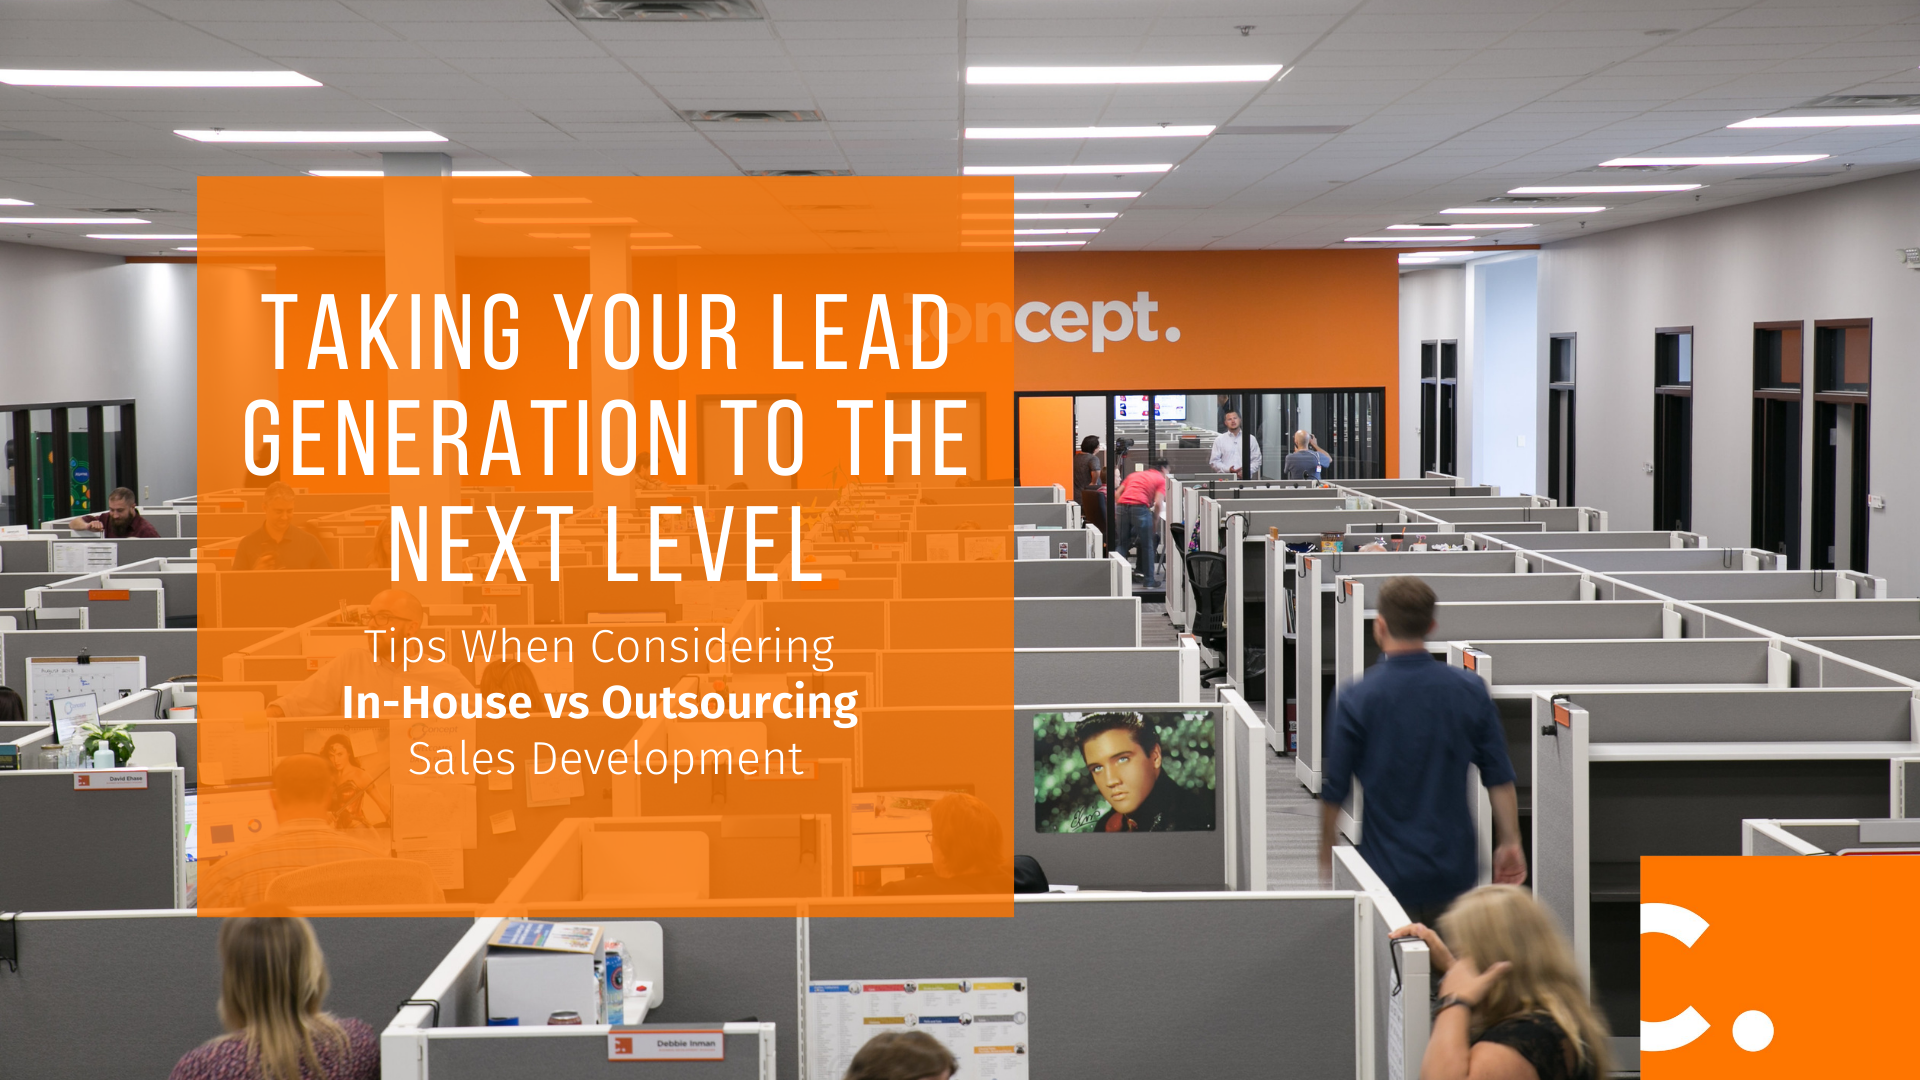 See what Concept recommends when considering in-house versus outsourcing lead generation and the many factors included